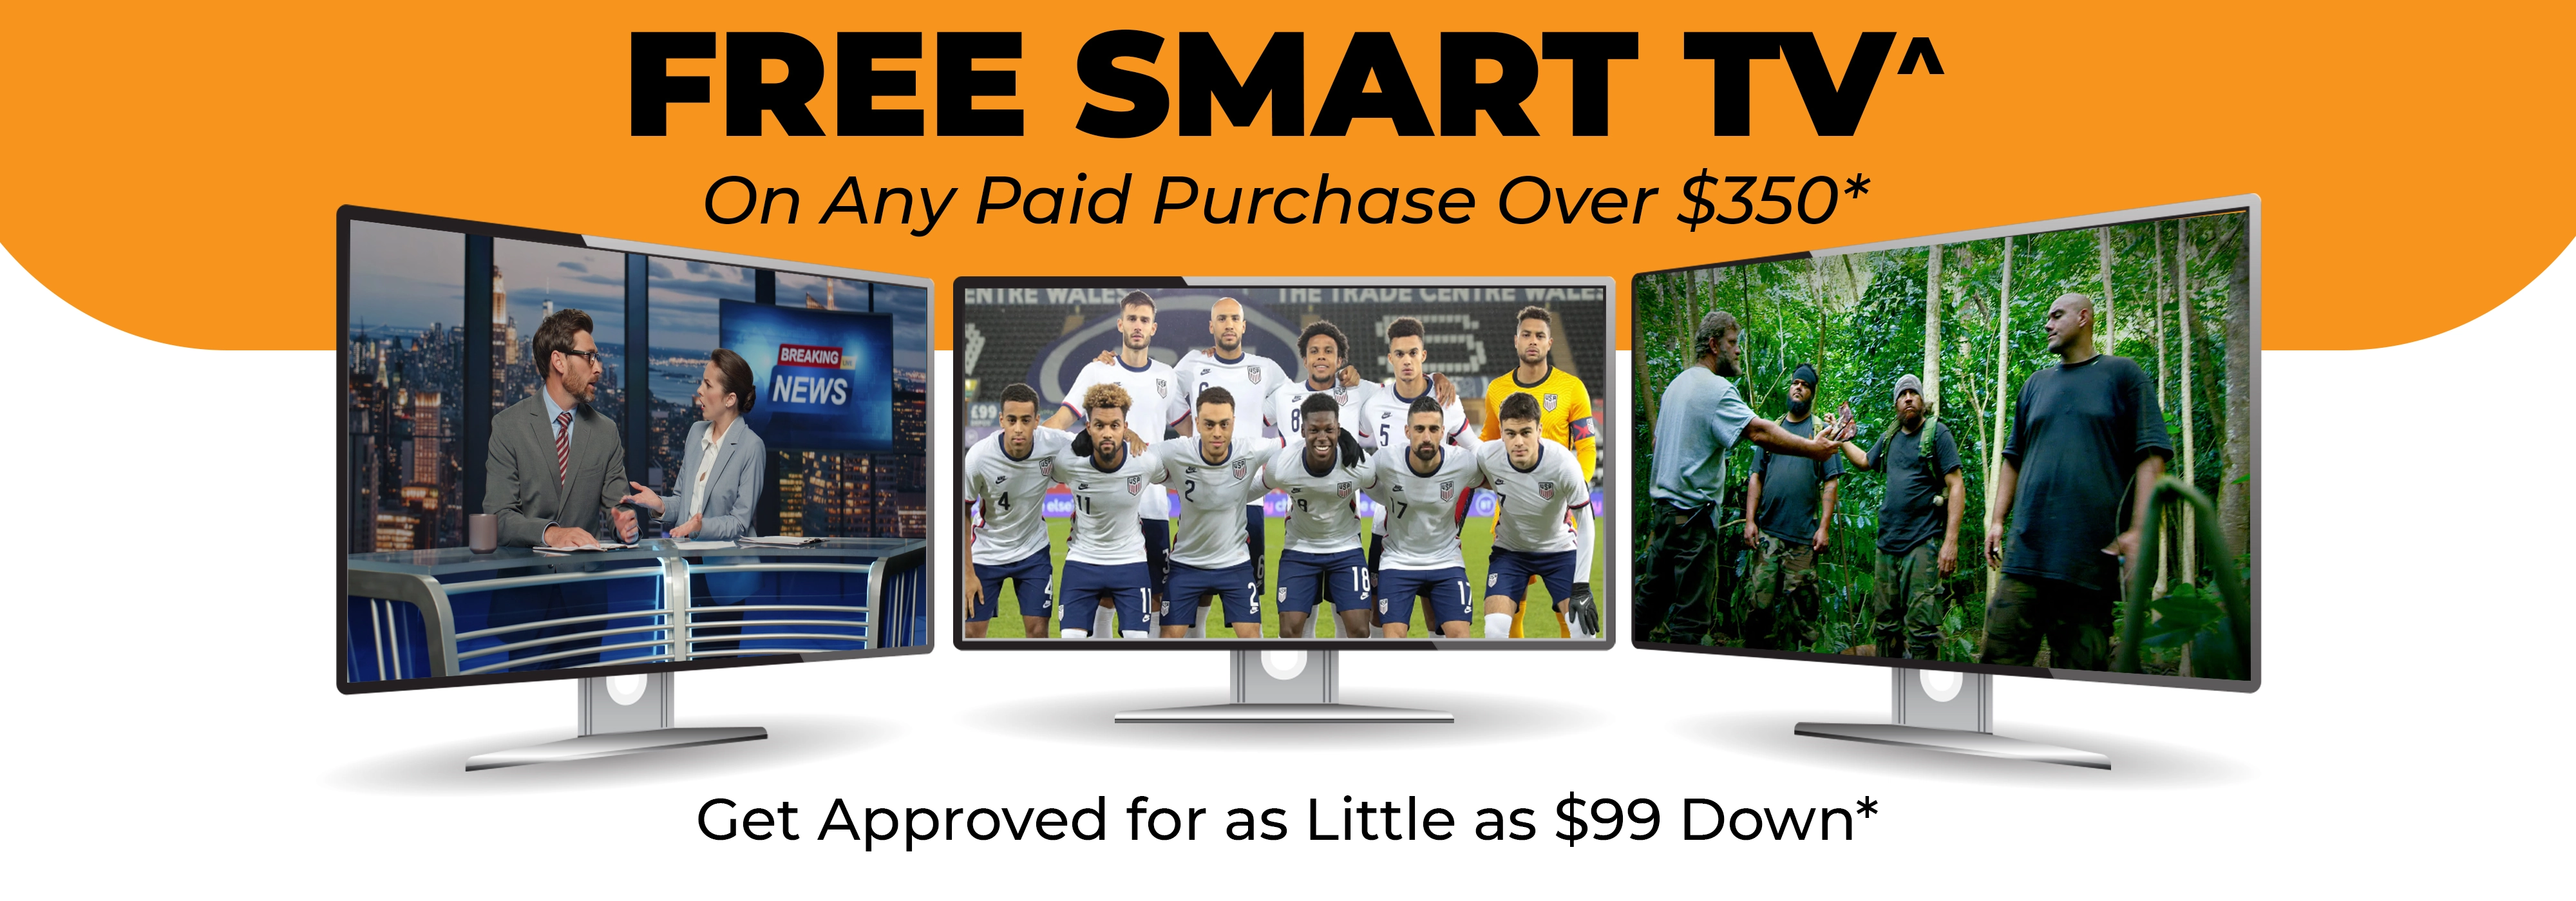 FREE^ Smart TV with Any Purchase Over $350. Get Approved for as Little as $99 Down*